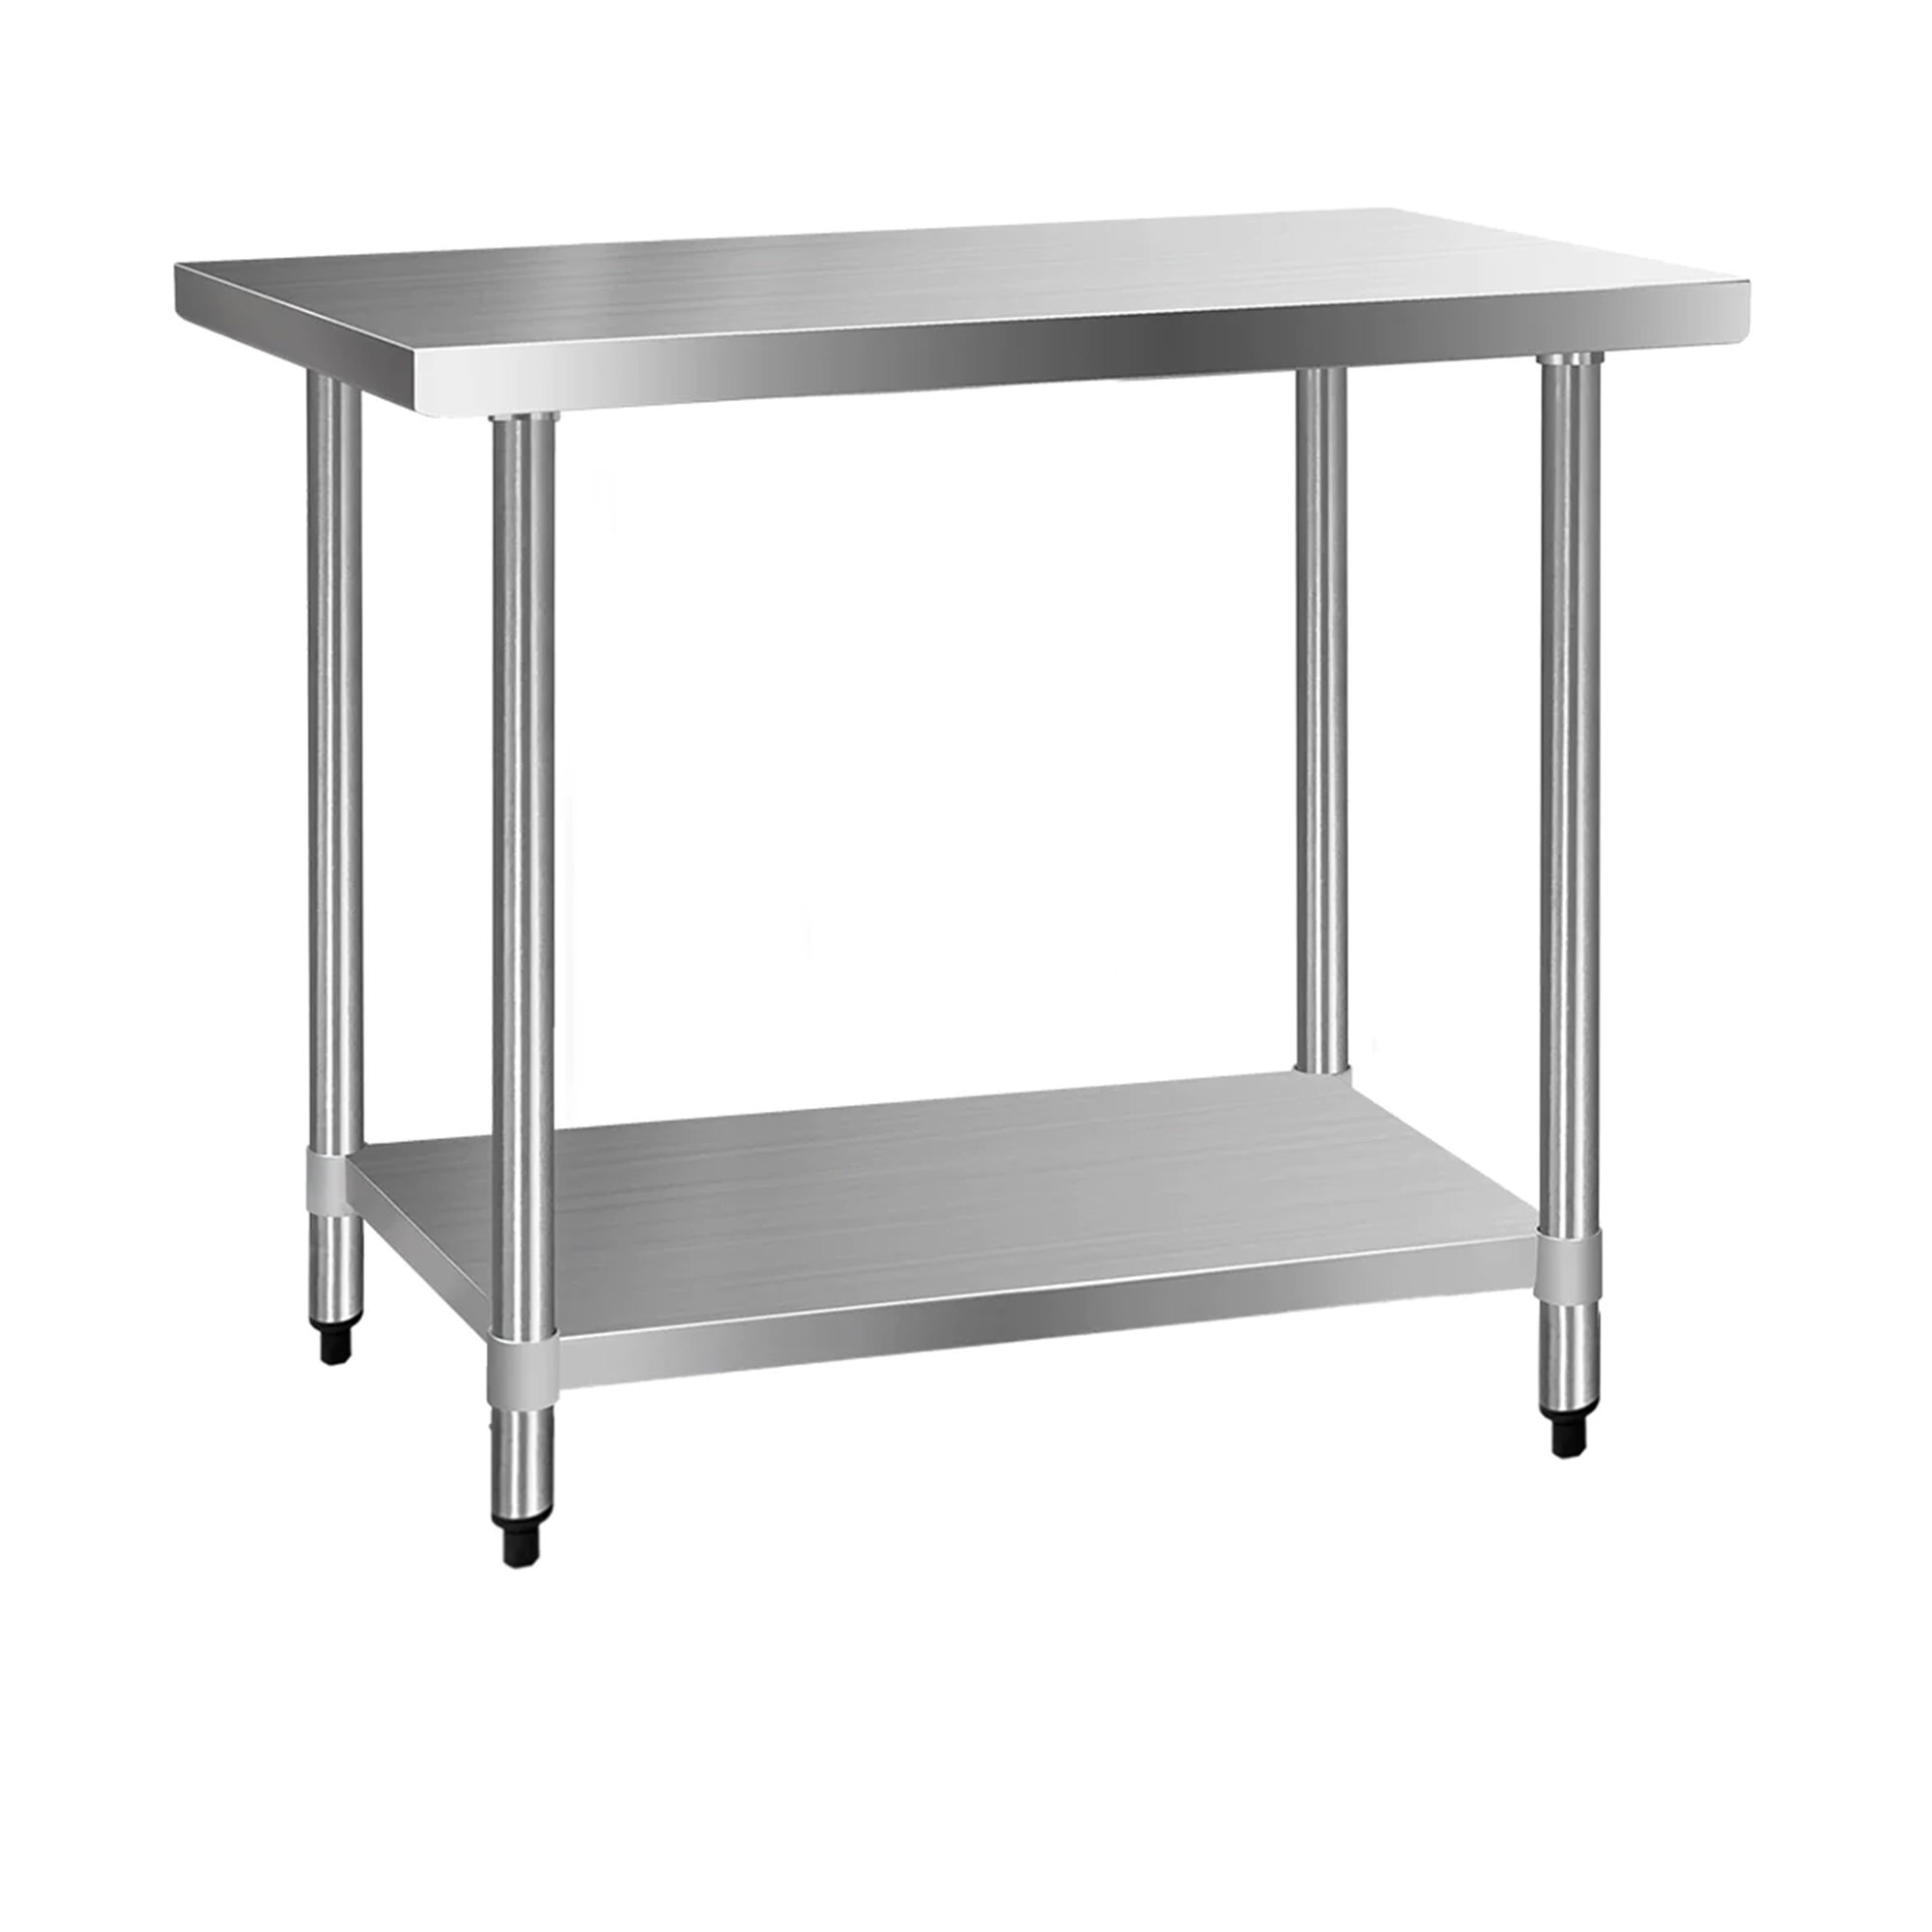 Cefito 430 Stainless Steel Kitchen Bench 121.9x61cm Image 1